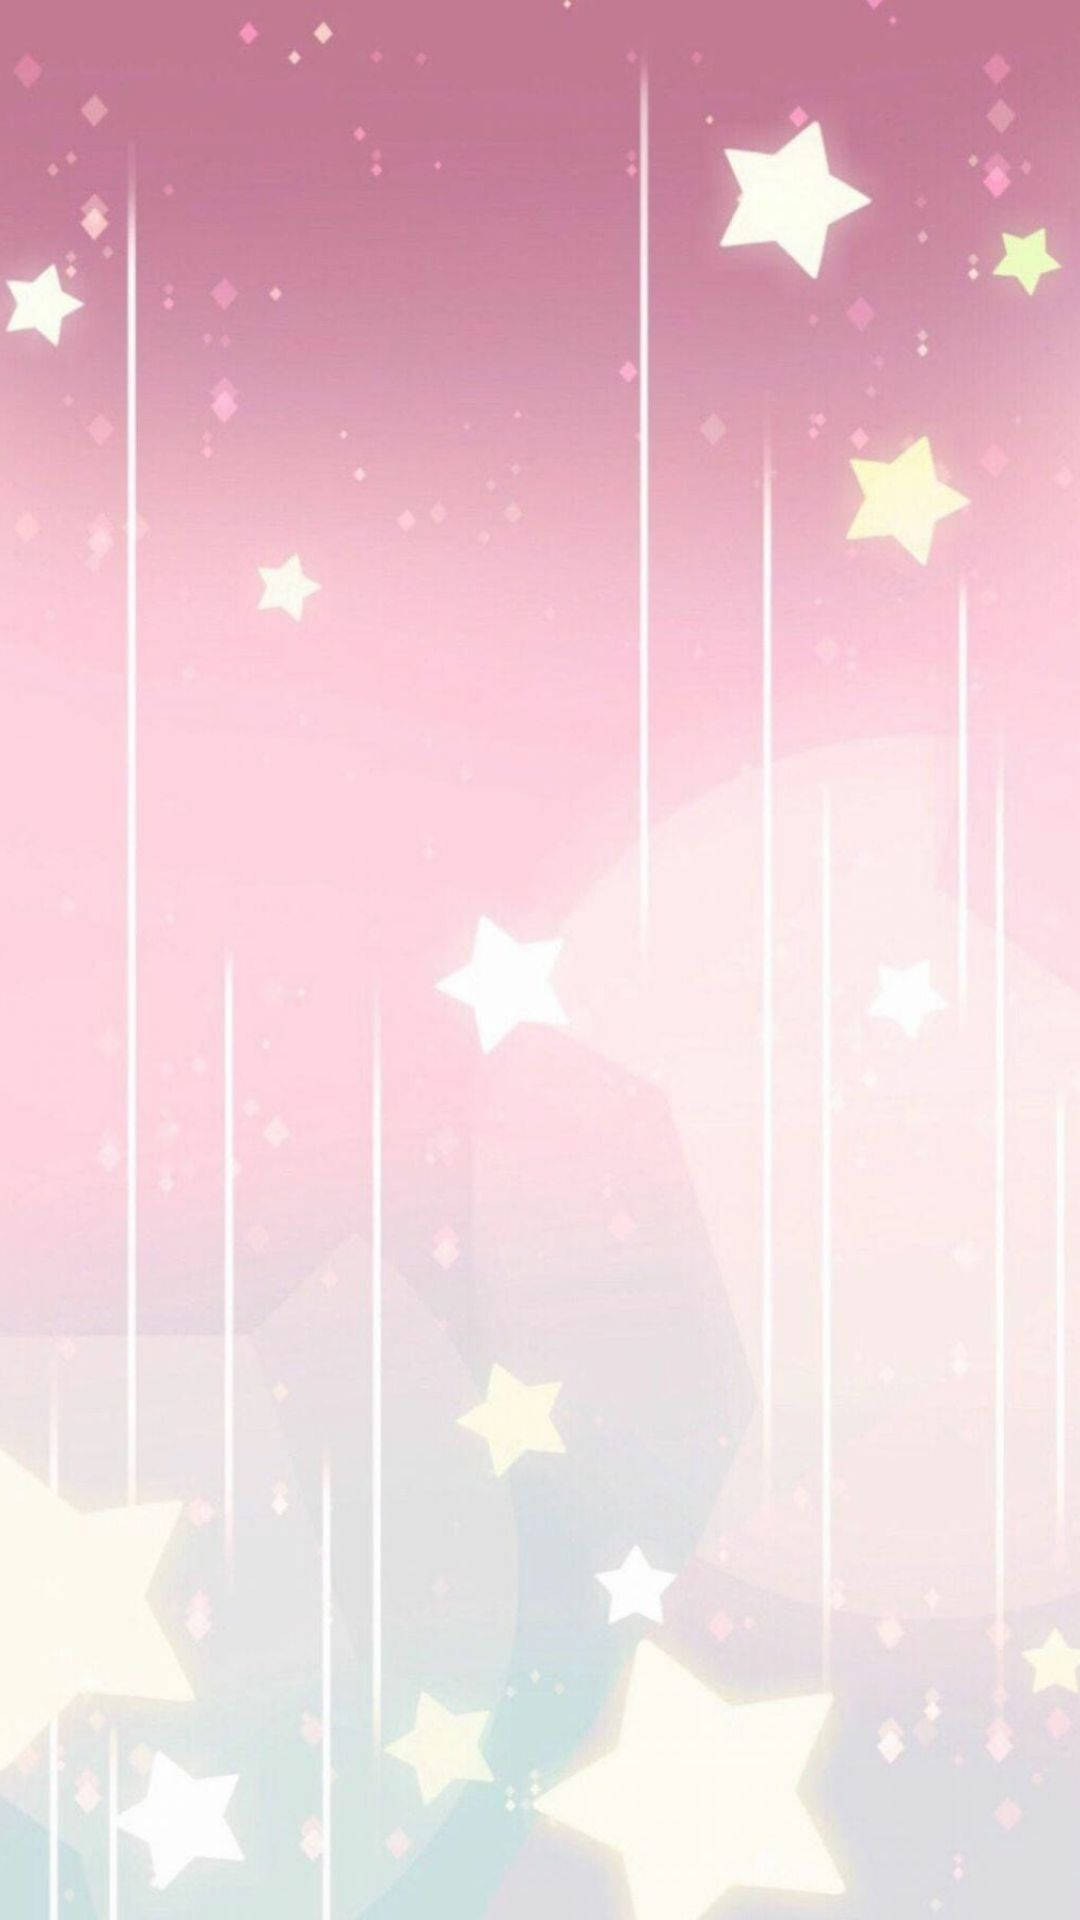 Falling Stars In Aesthetic Pink Sky Background